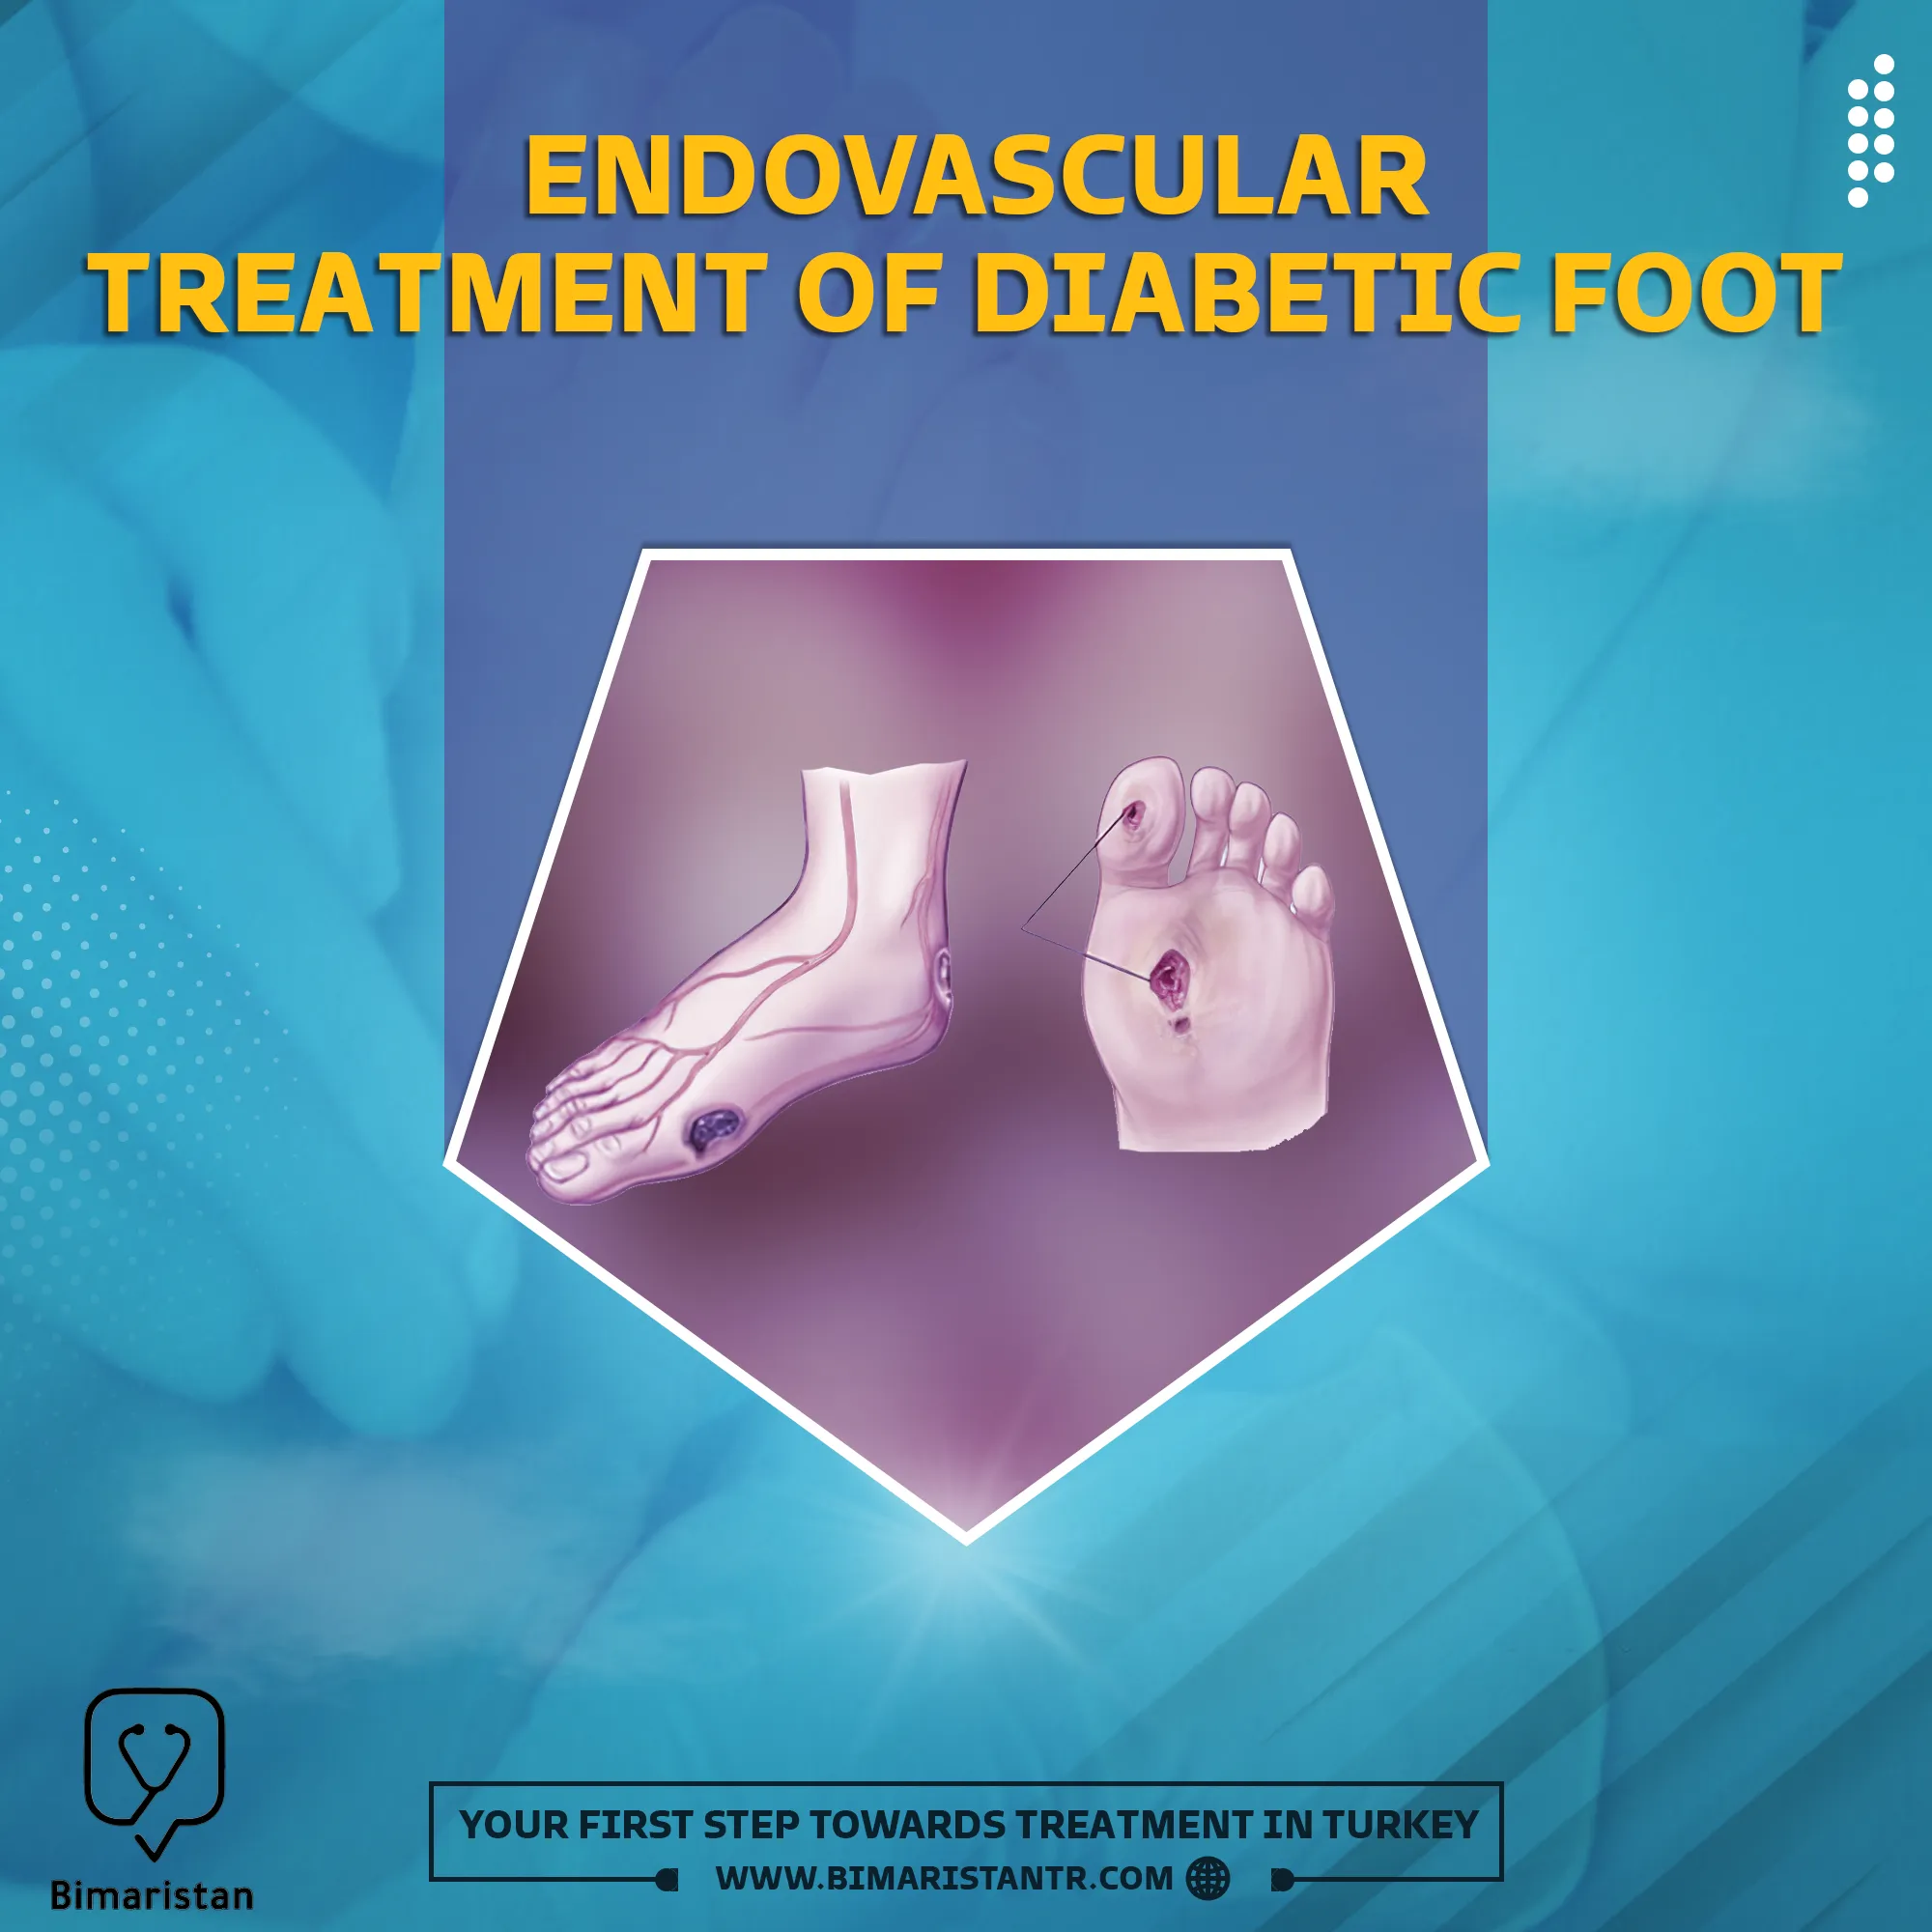 Endovascular treatment of the diabetic foot